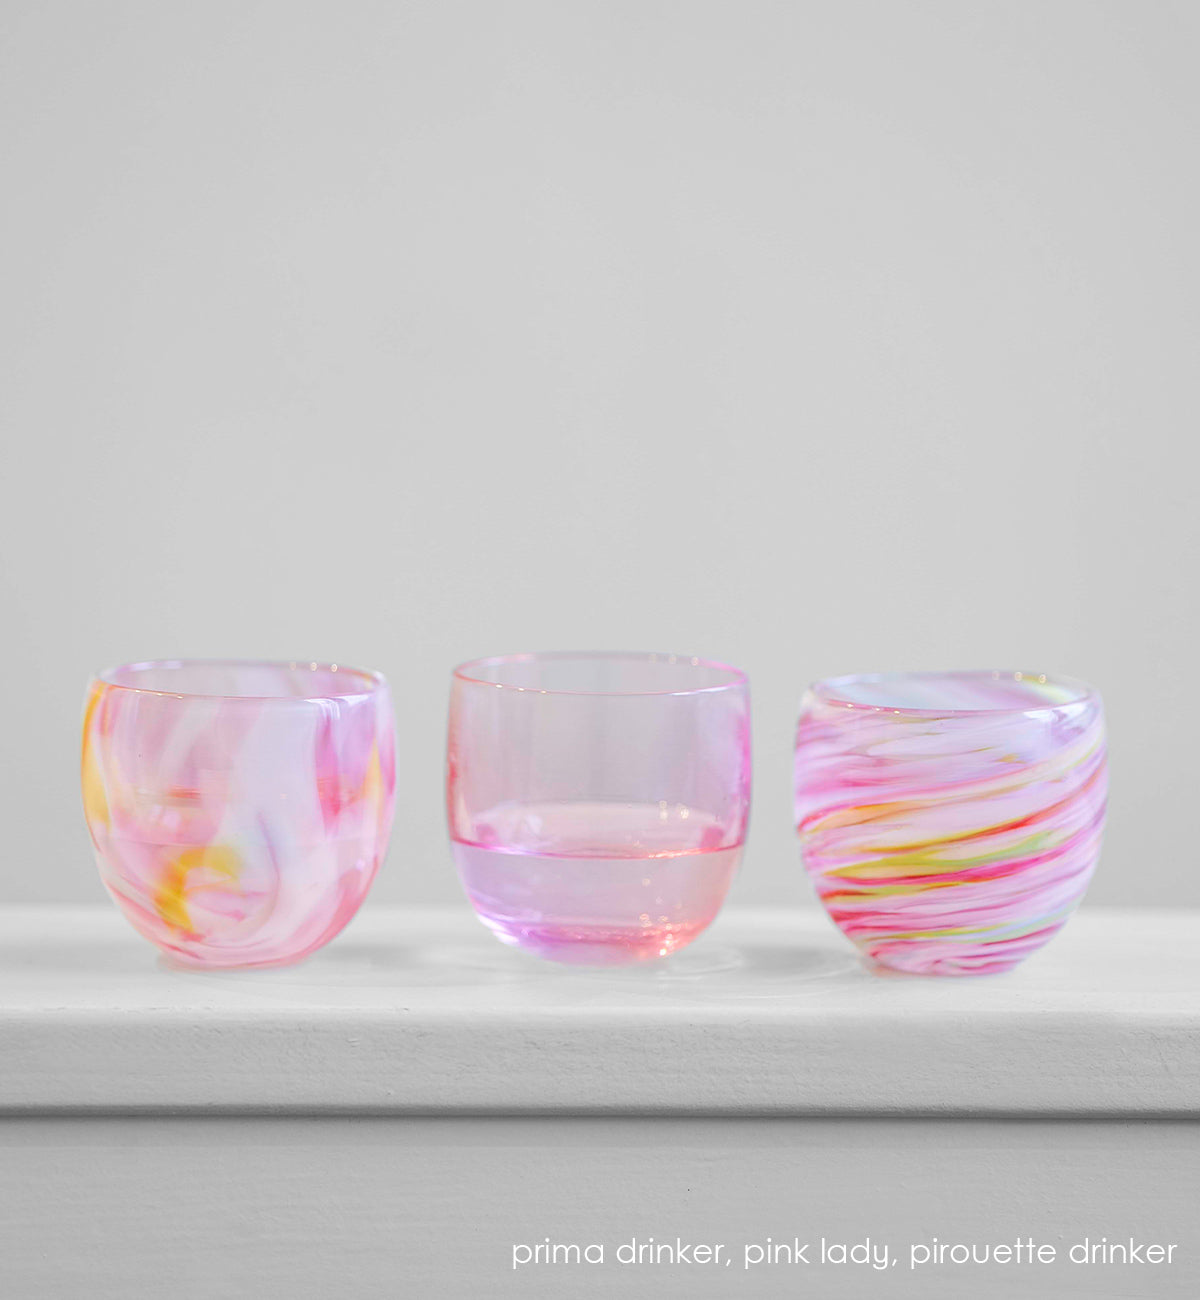 prima pink multi-colored petal, pink lady transparent pink, pirouette pink multi-colored swirl, hand-blown drinking glass